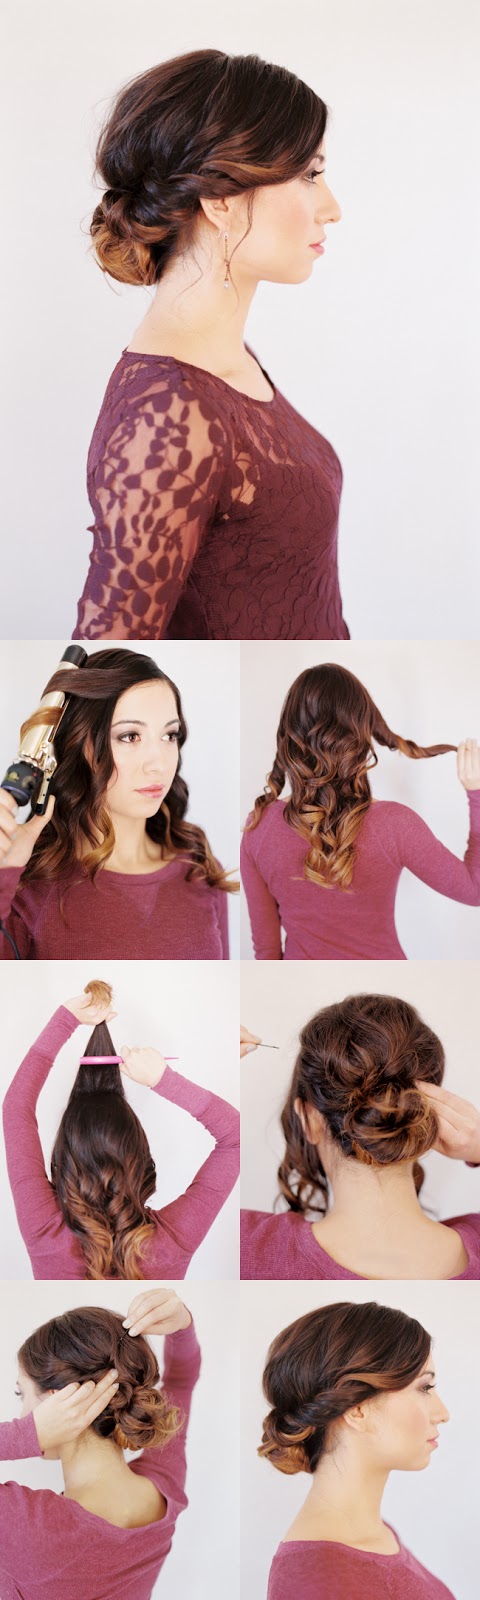 hairstyle6